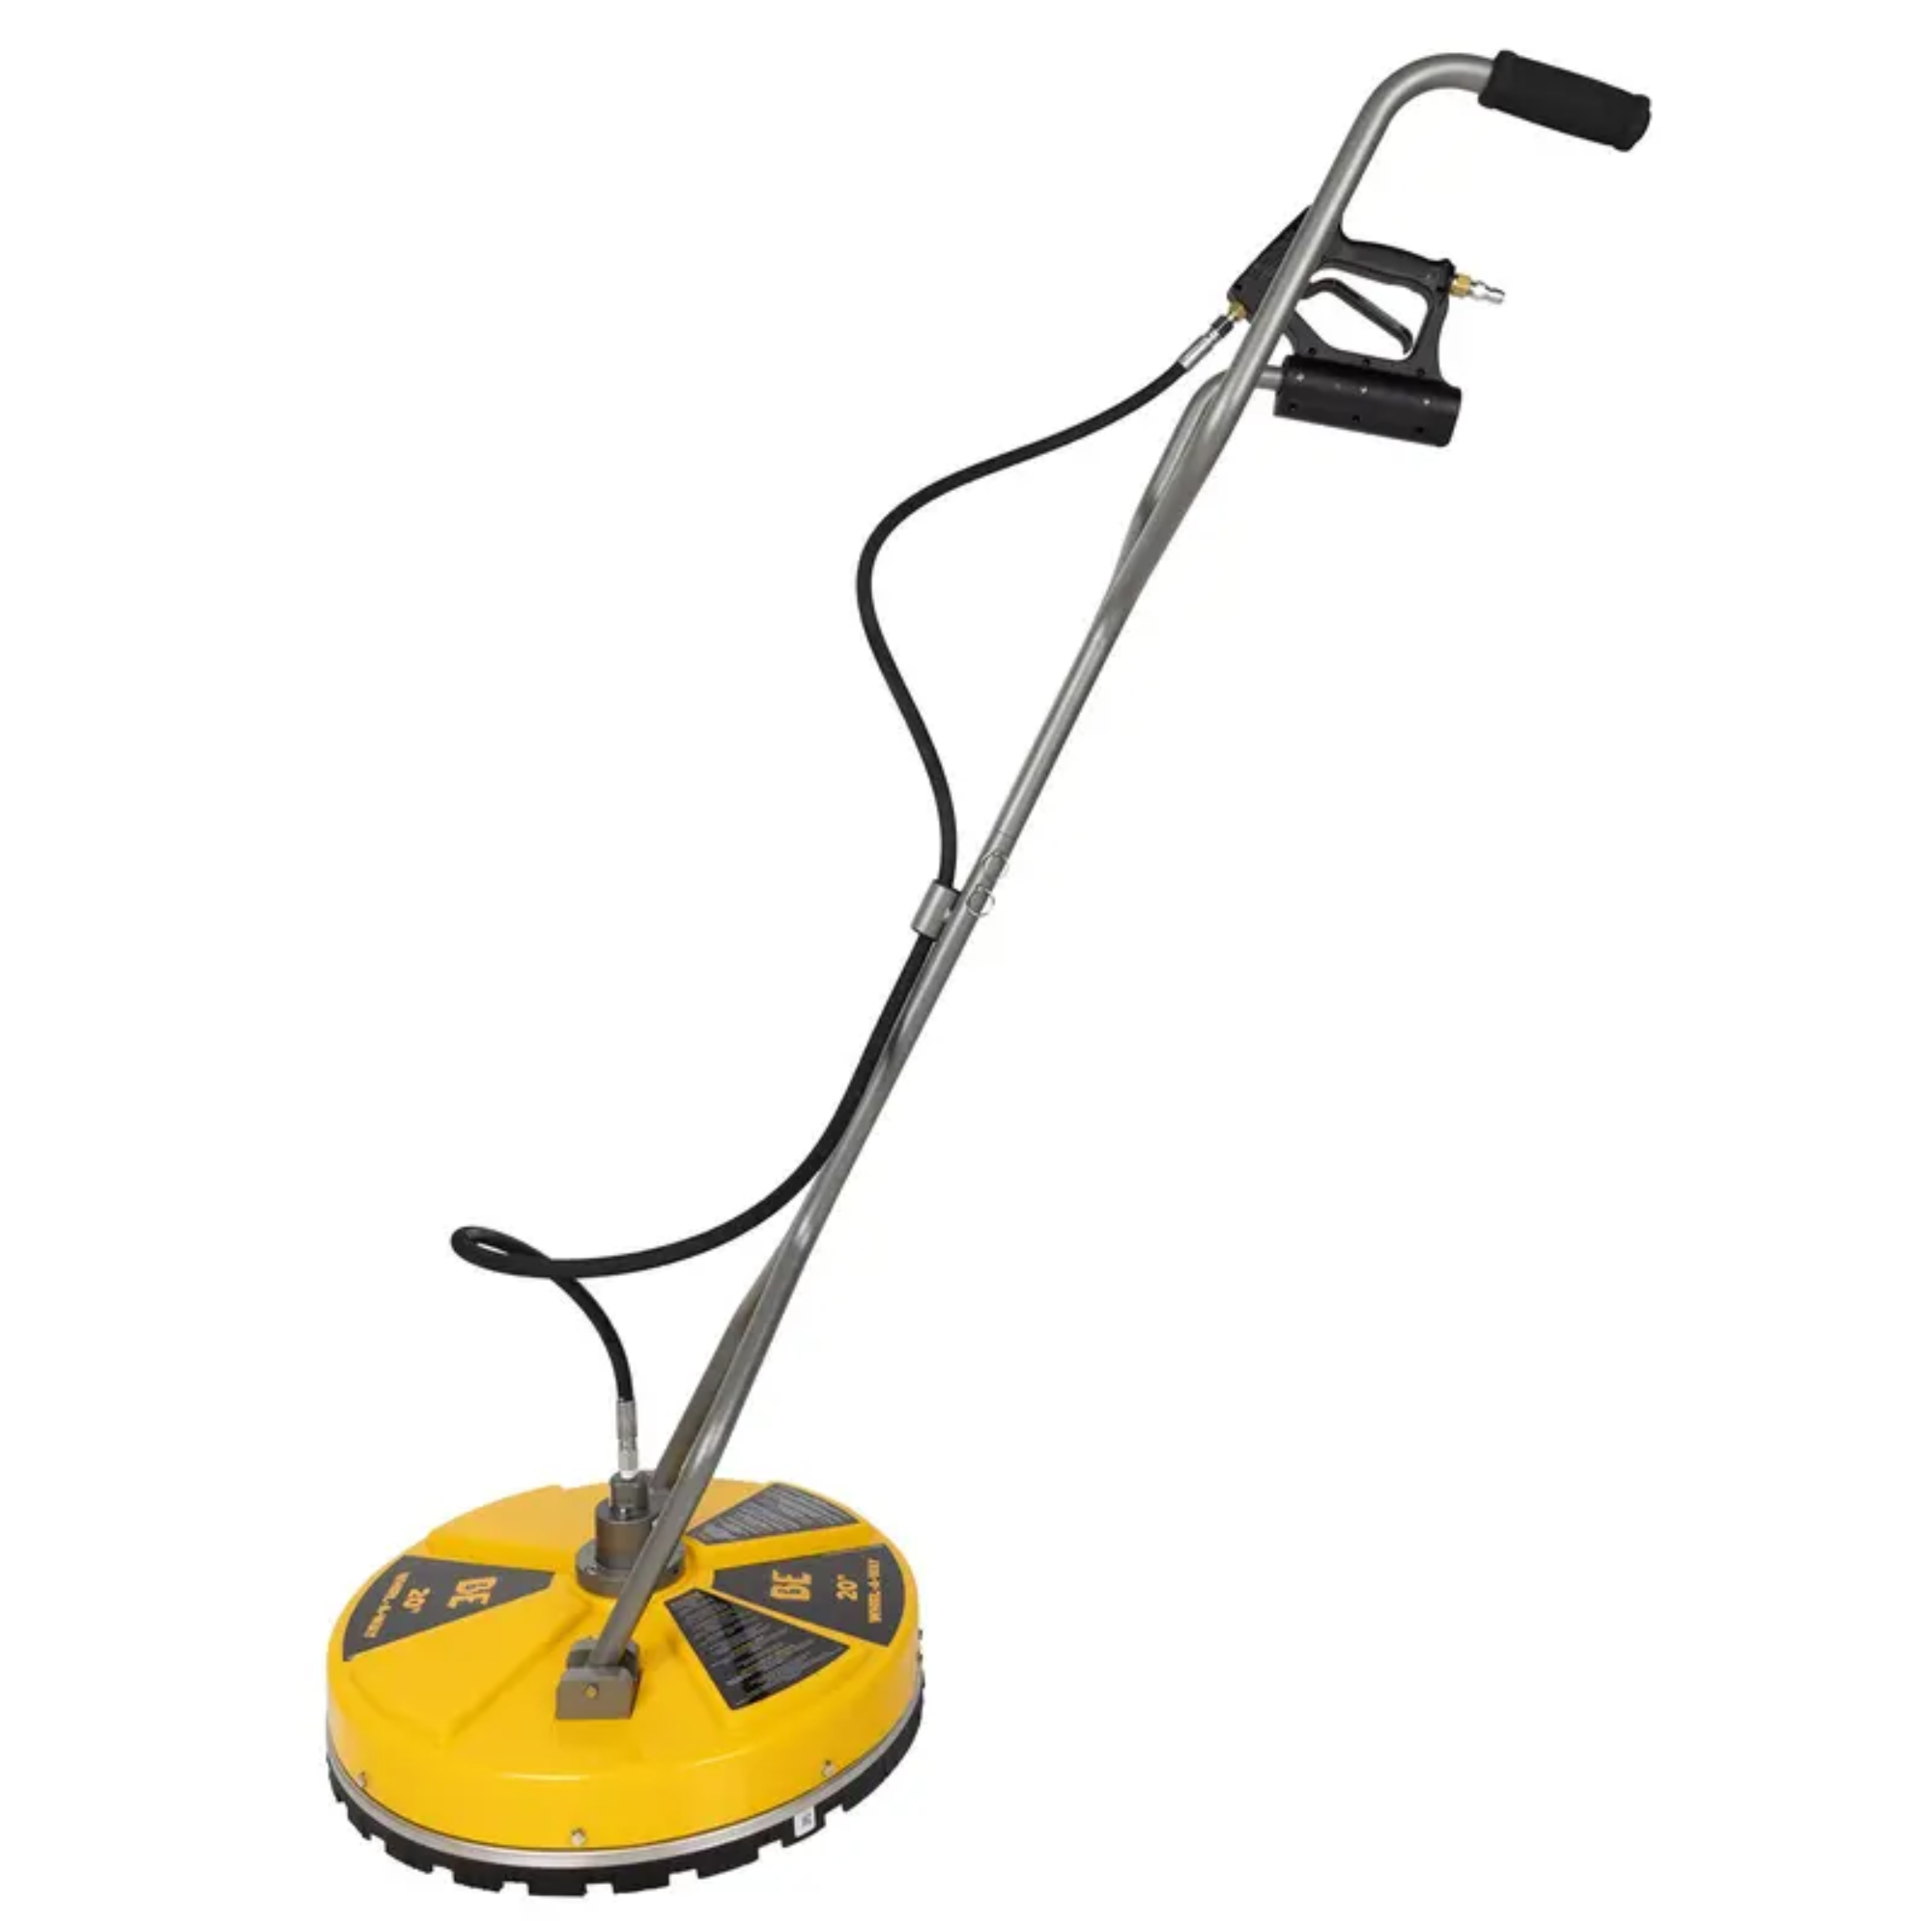 BE 20" Whirl-A-Way Surface Cleaner